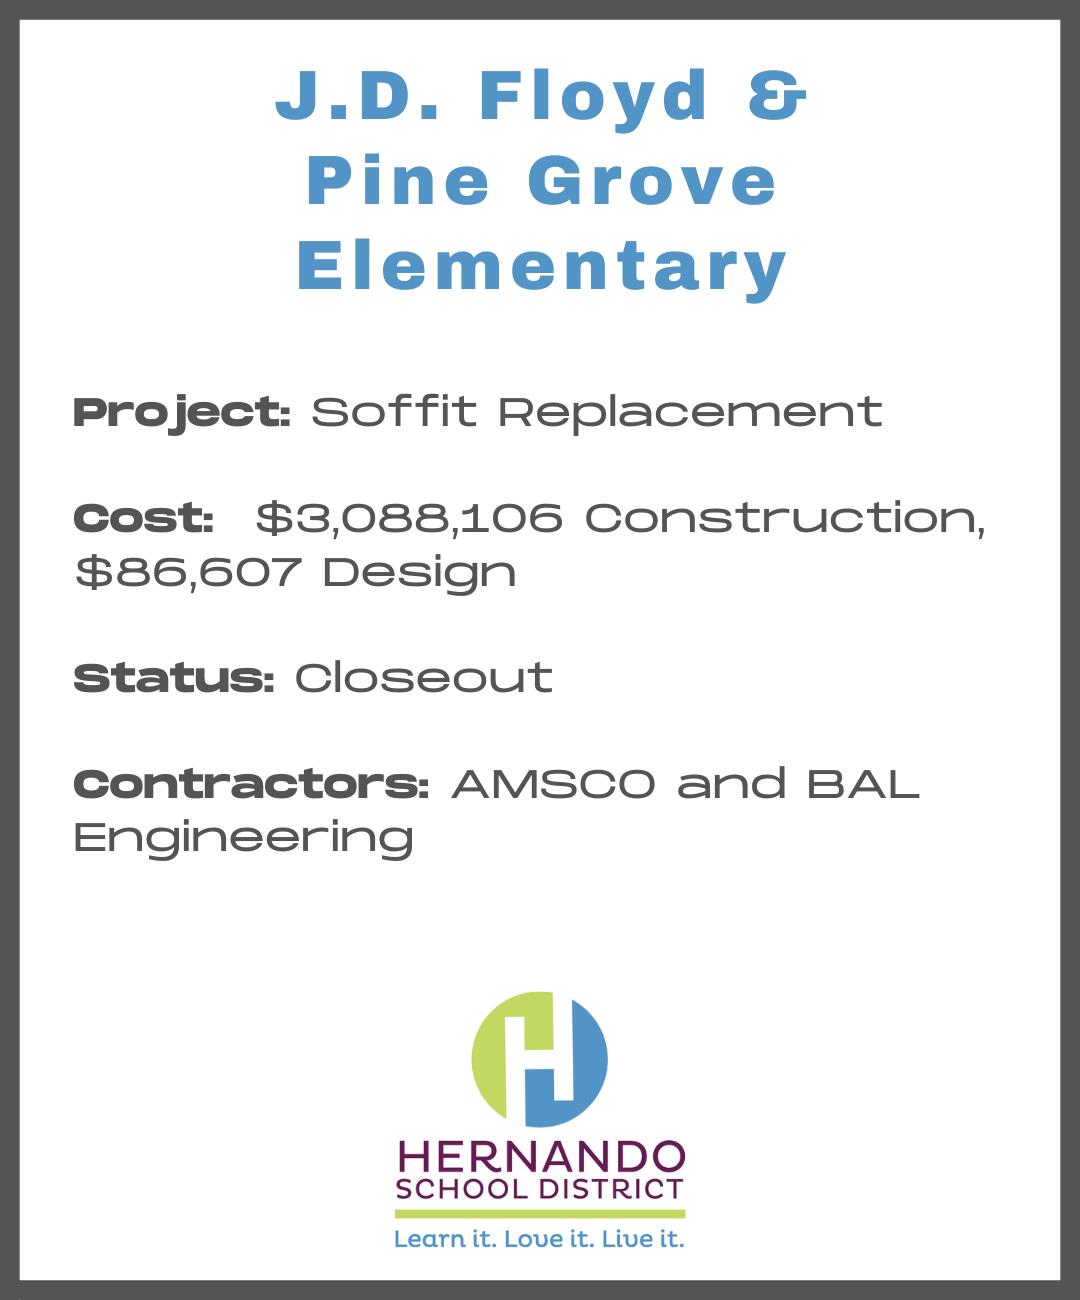 J.D Floyd & Pine Grove Elementary Soffit Replacement graphic